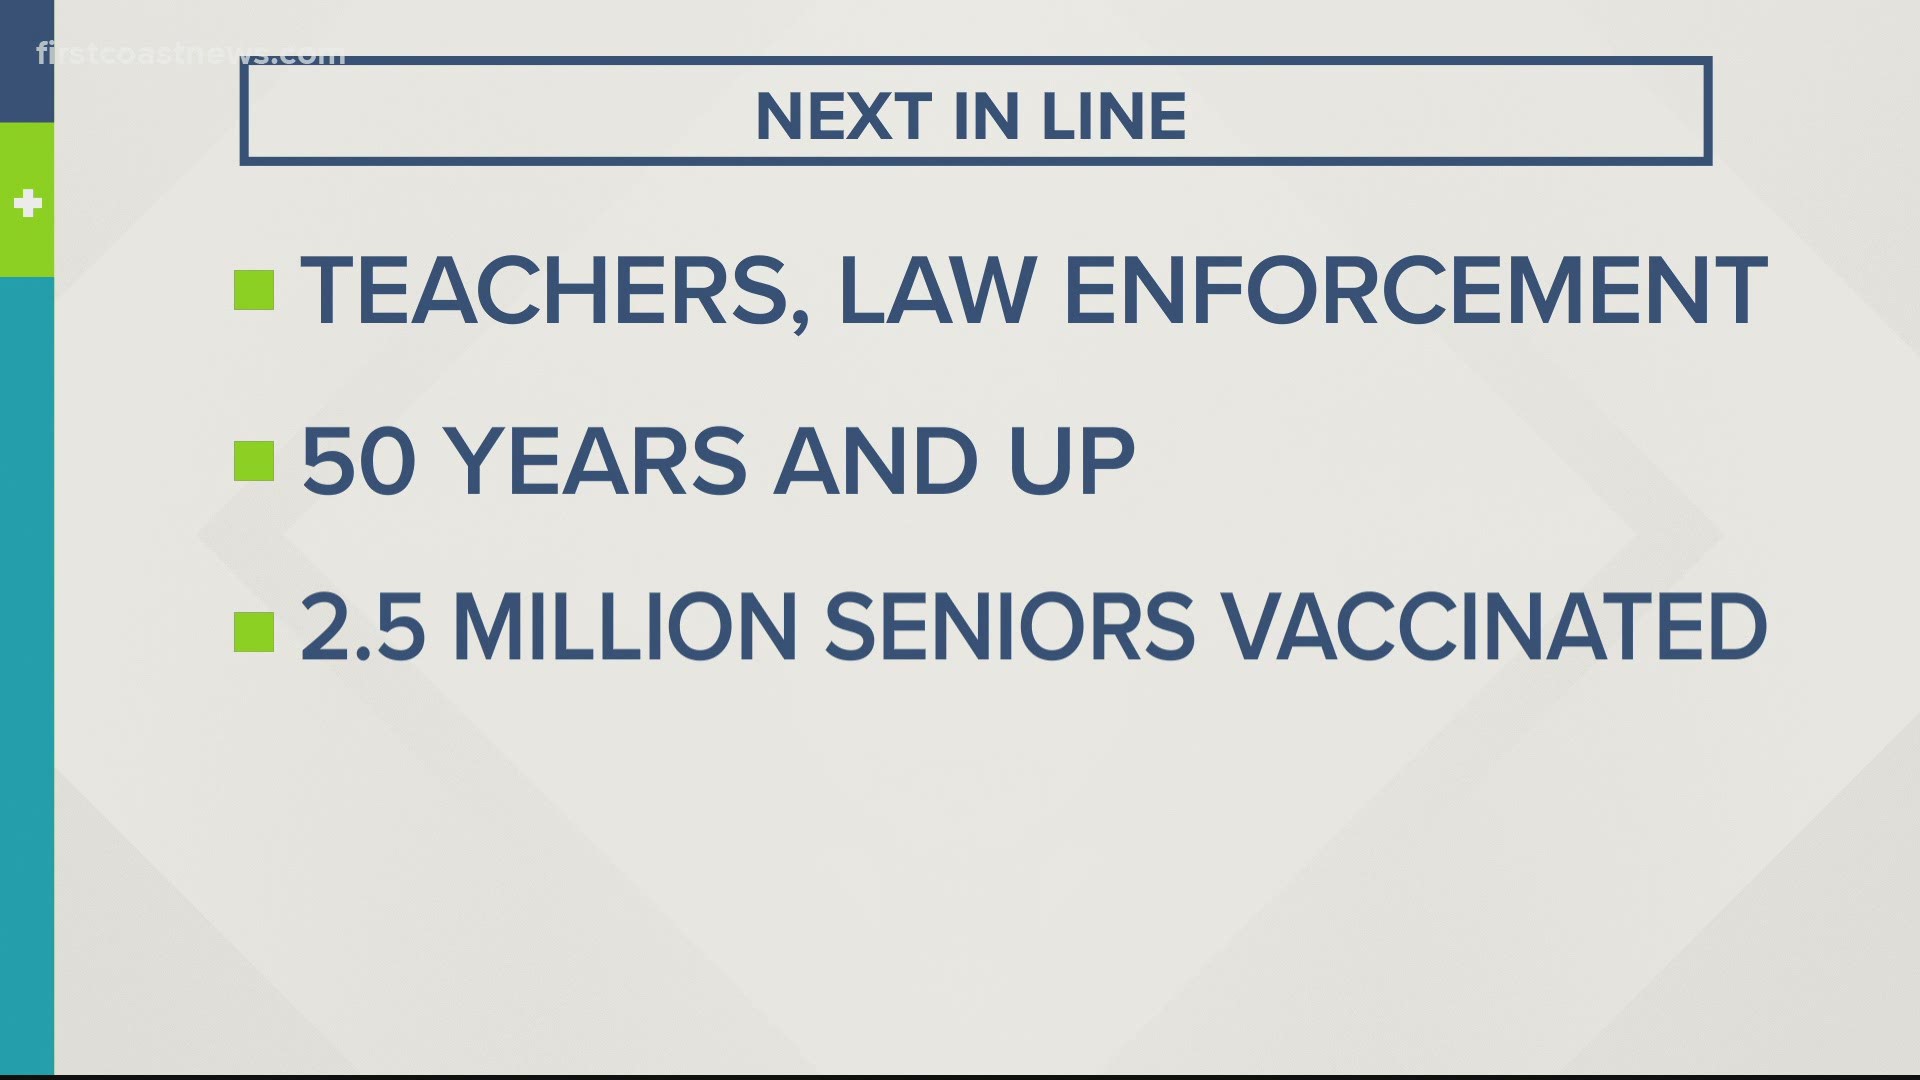 This includes teachers, police officers and any firefighters who have not yet received the vaccine.